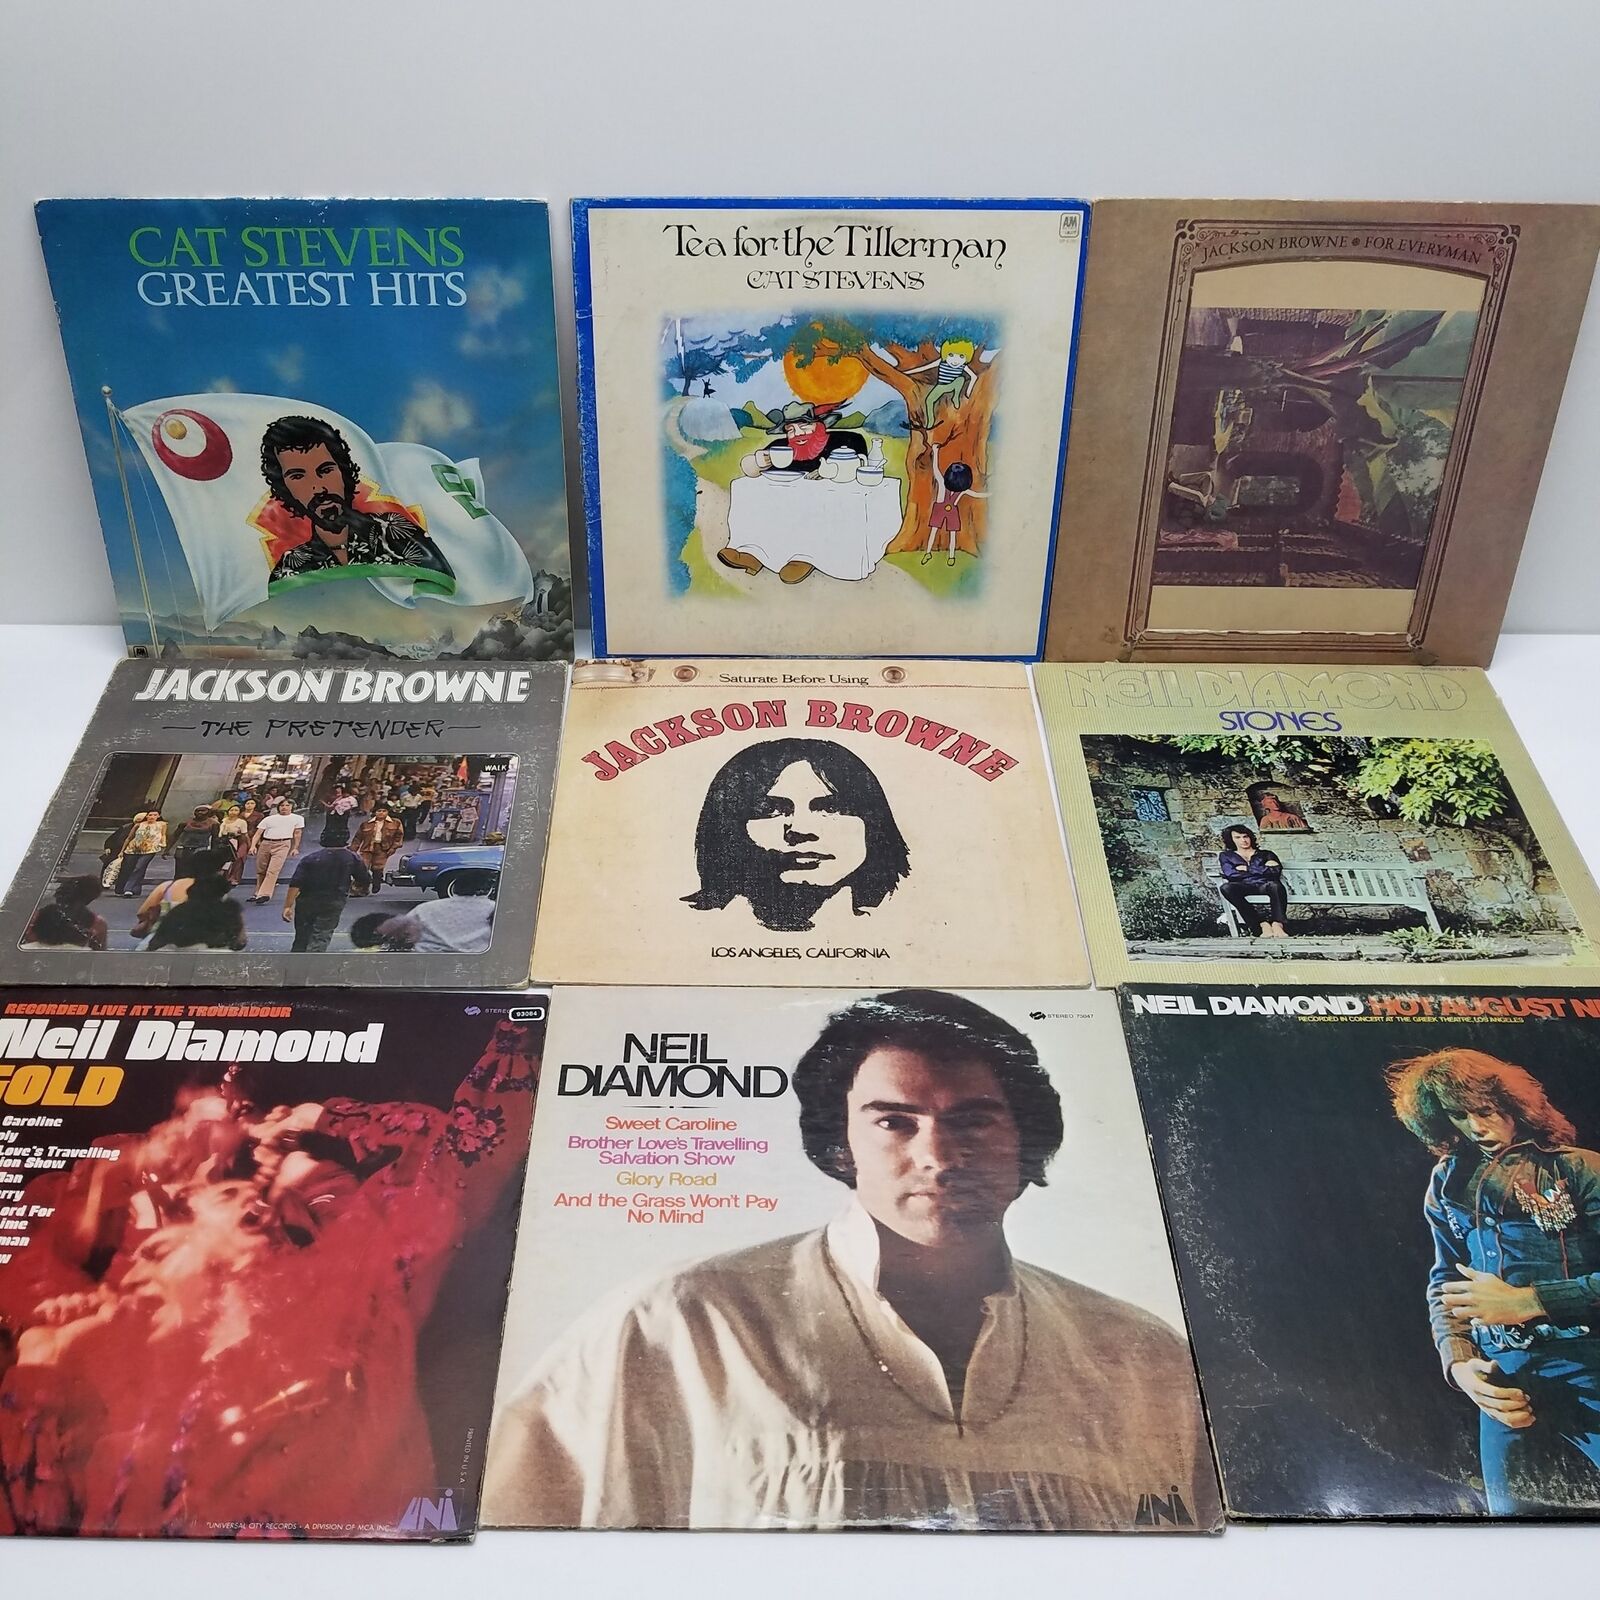 Untested Lot of 9 Mixed Genres Vinyl Records Ft. Jackson Browne, Neil Diamond